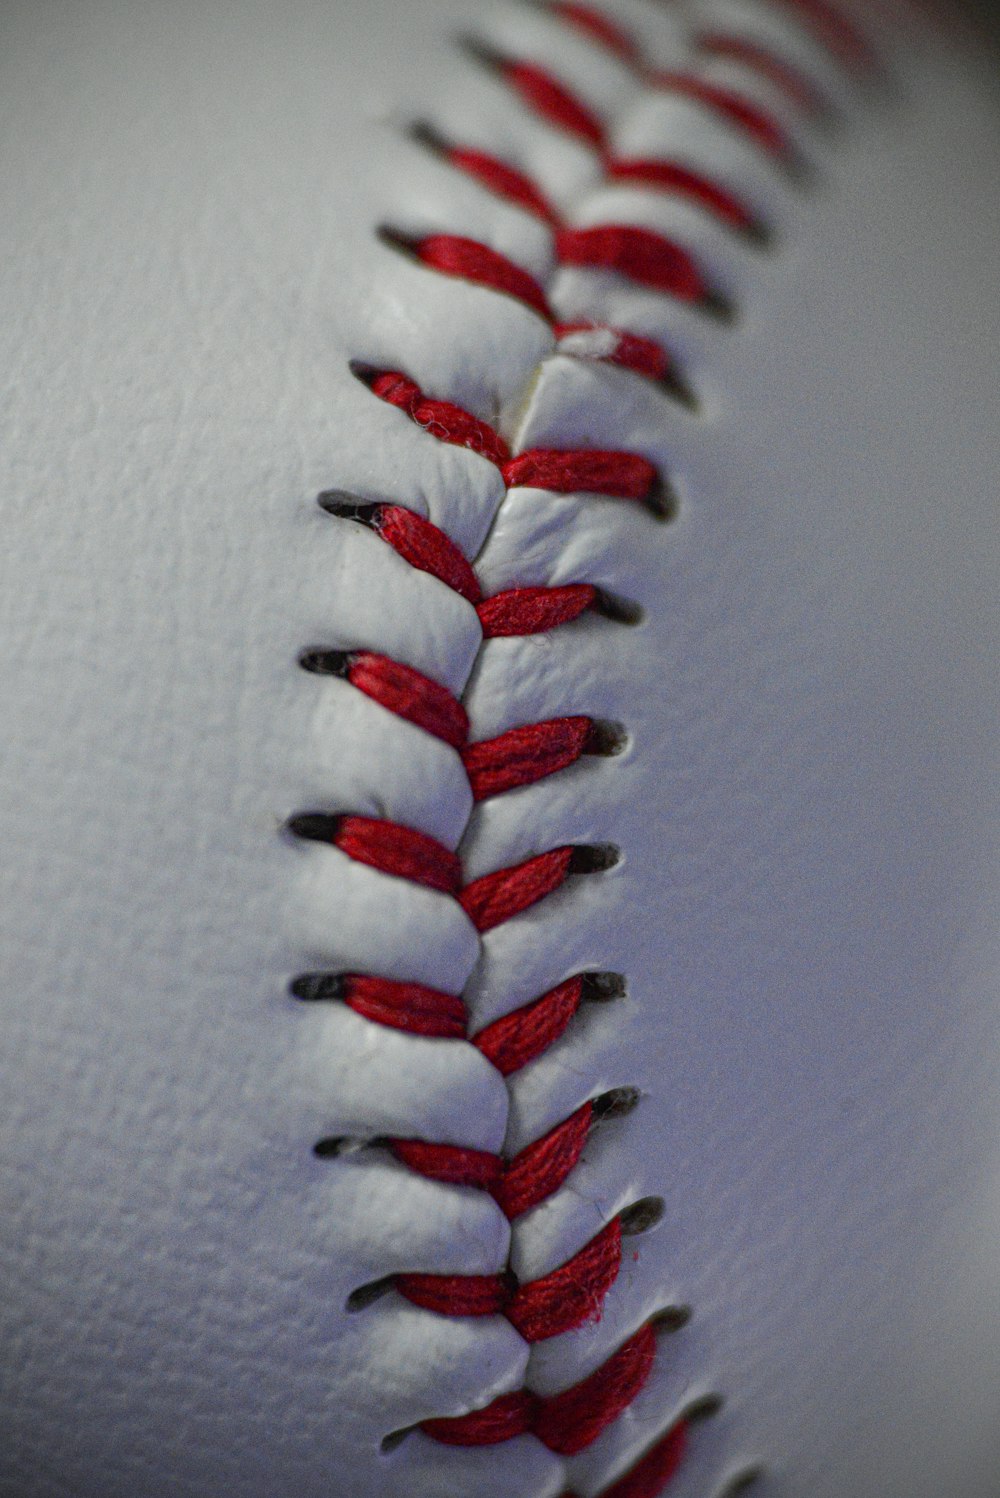 a close up of a baseball with red stitches